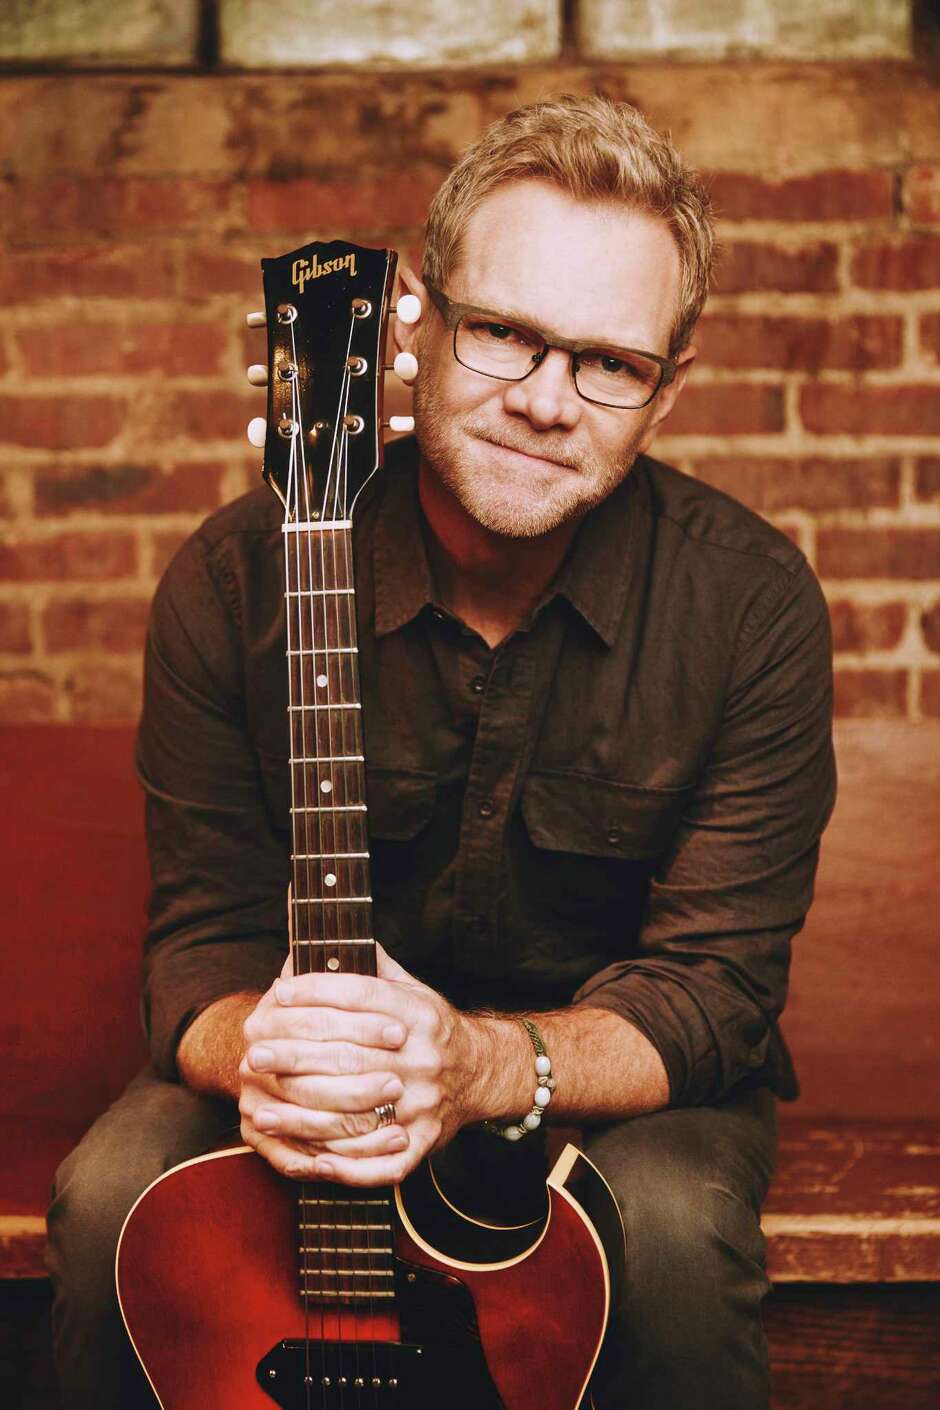 Steven Curtis Chapman sets his life stories, faith to music